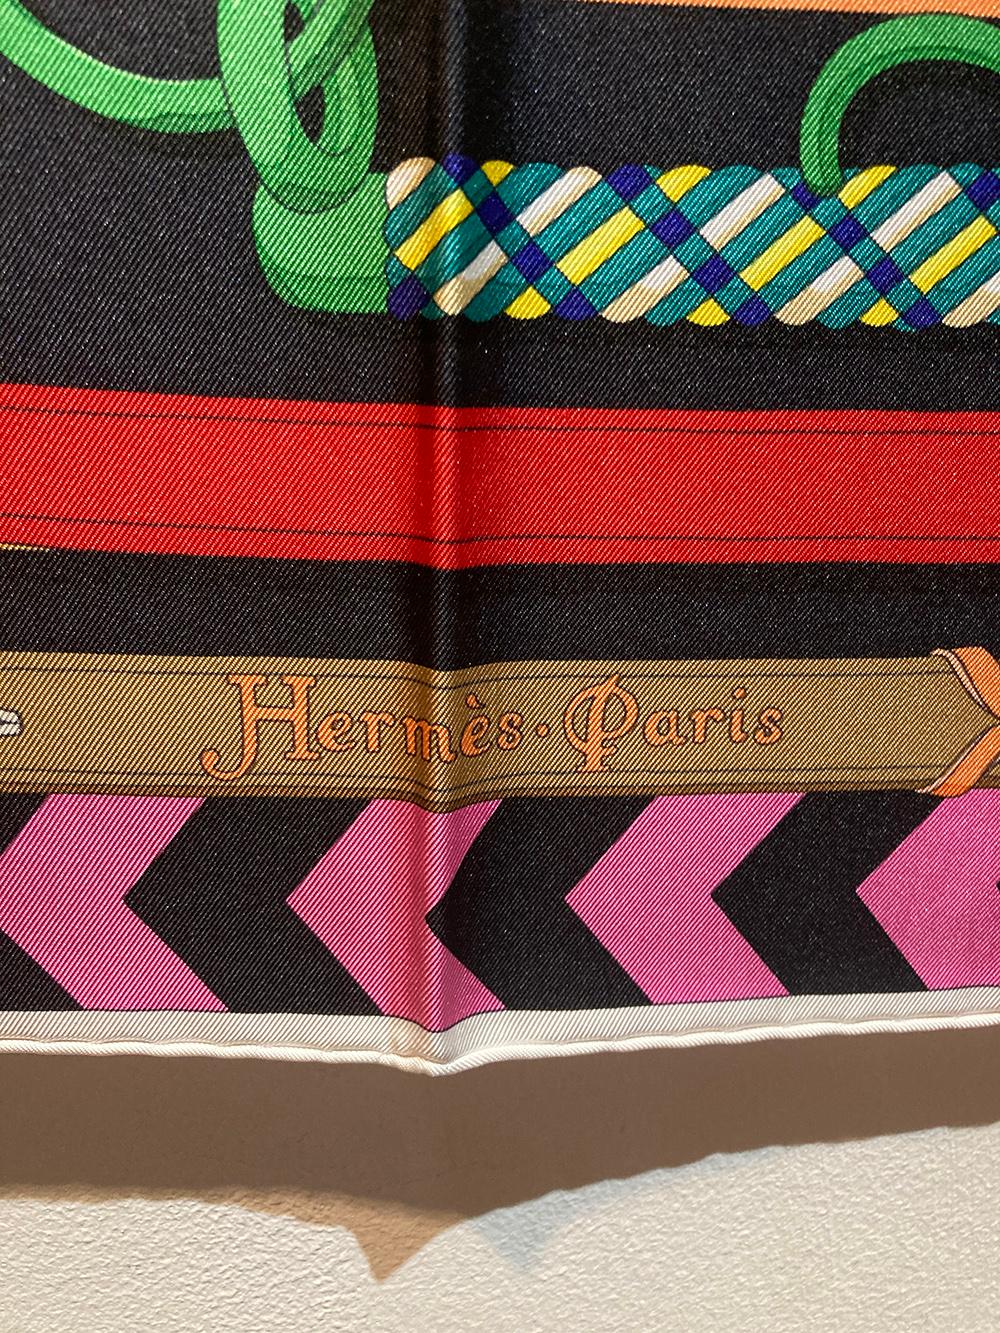 Hermes Panoplie Equestre Silk Scarf in excellent like-new condition. Original silk screen design c2020 by Virginie Jamin features a beautiful multicolor assortment of horse dressing accessories in green, red, blue, yellow and cream over a black